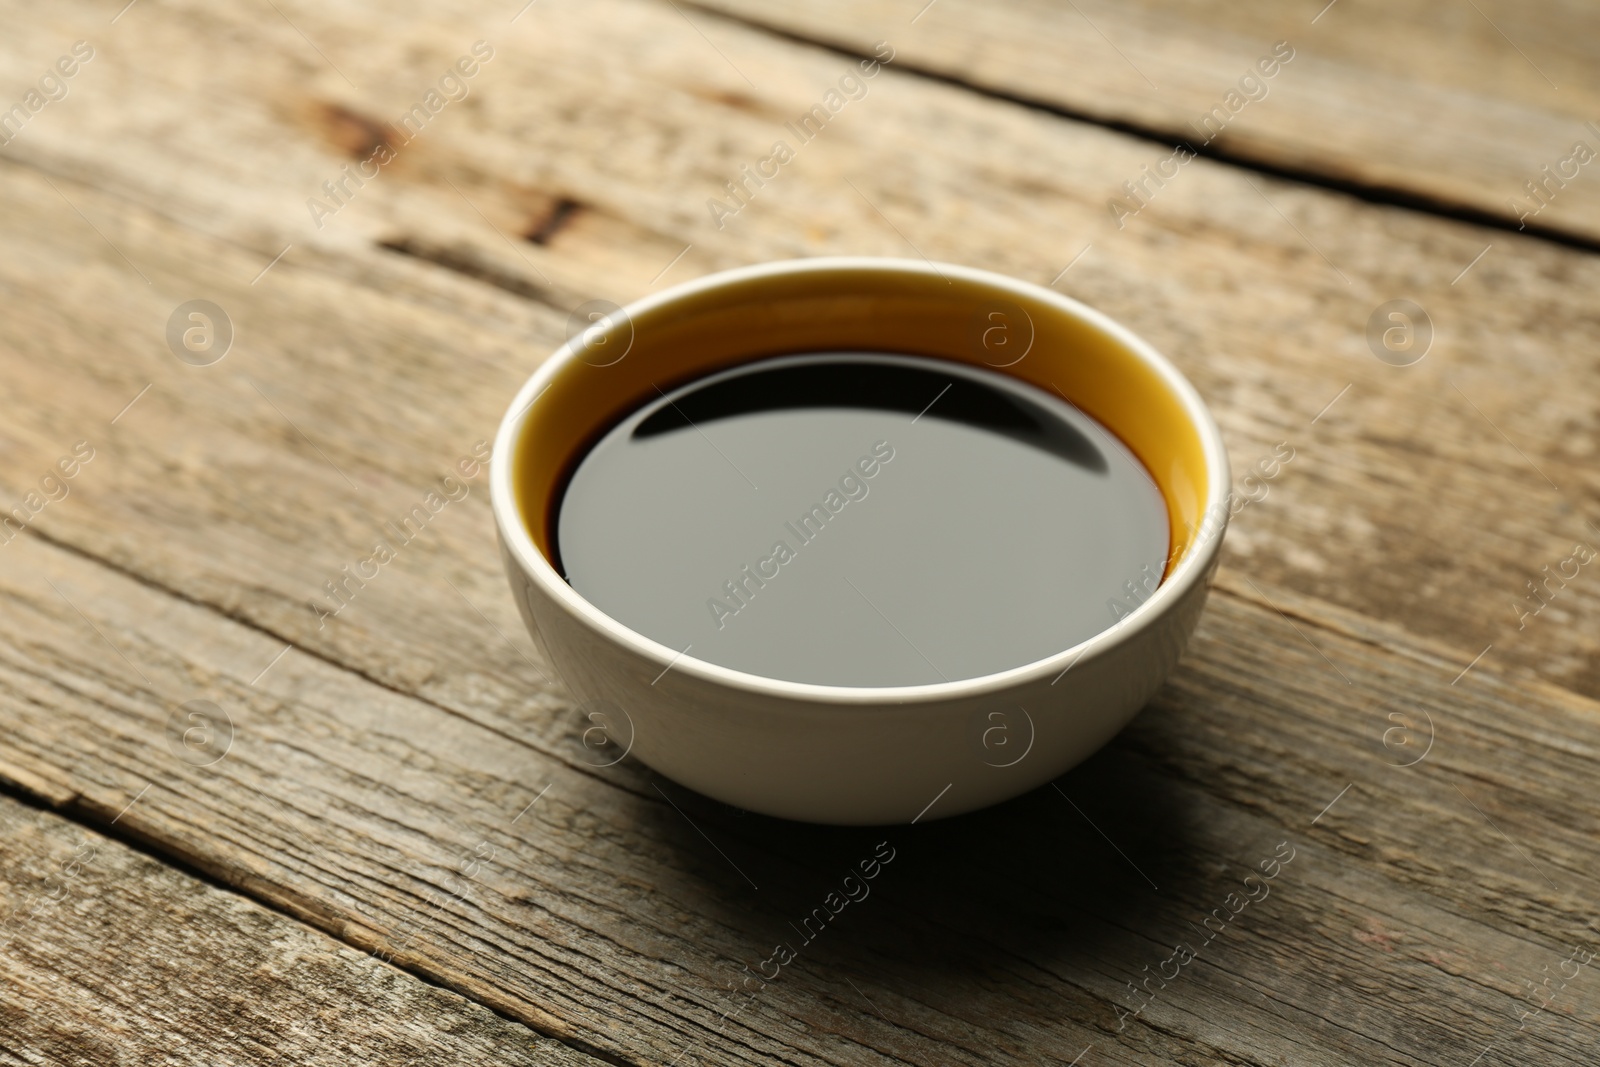 Photo of Soy sauce in bowl on wooden table